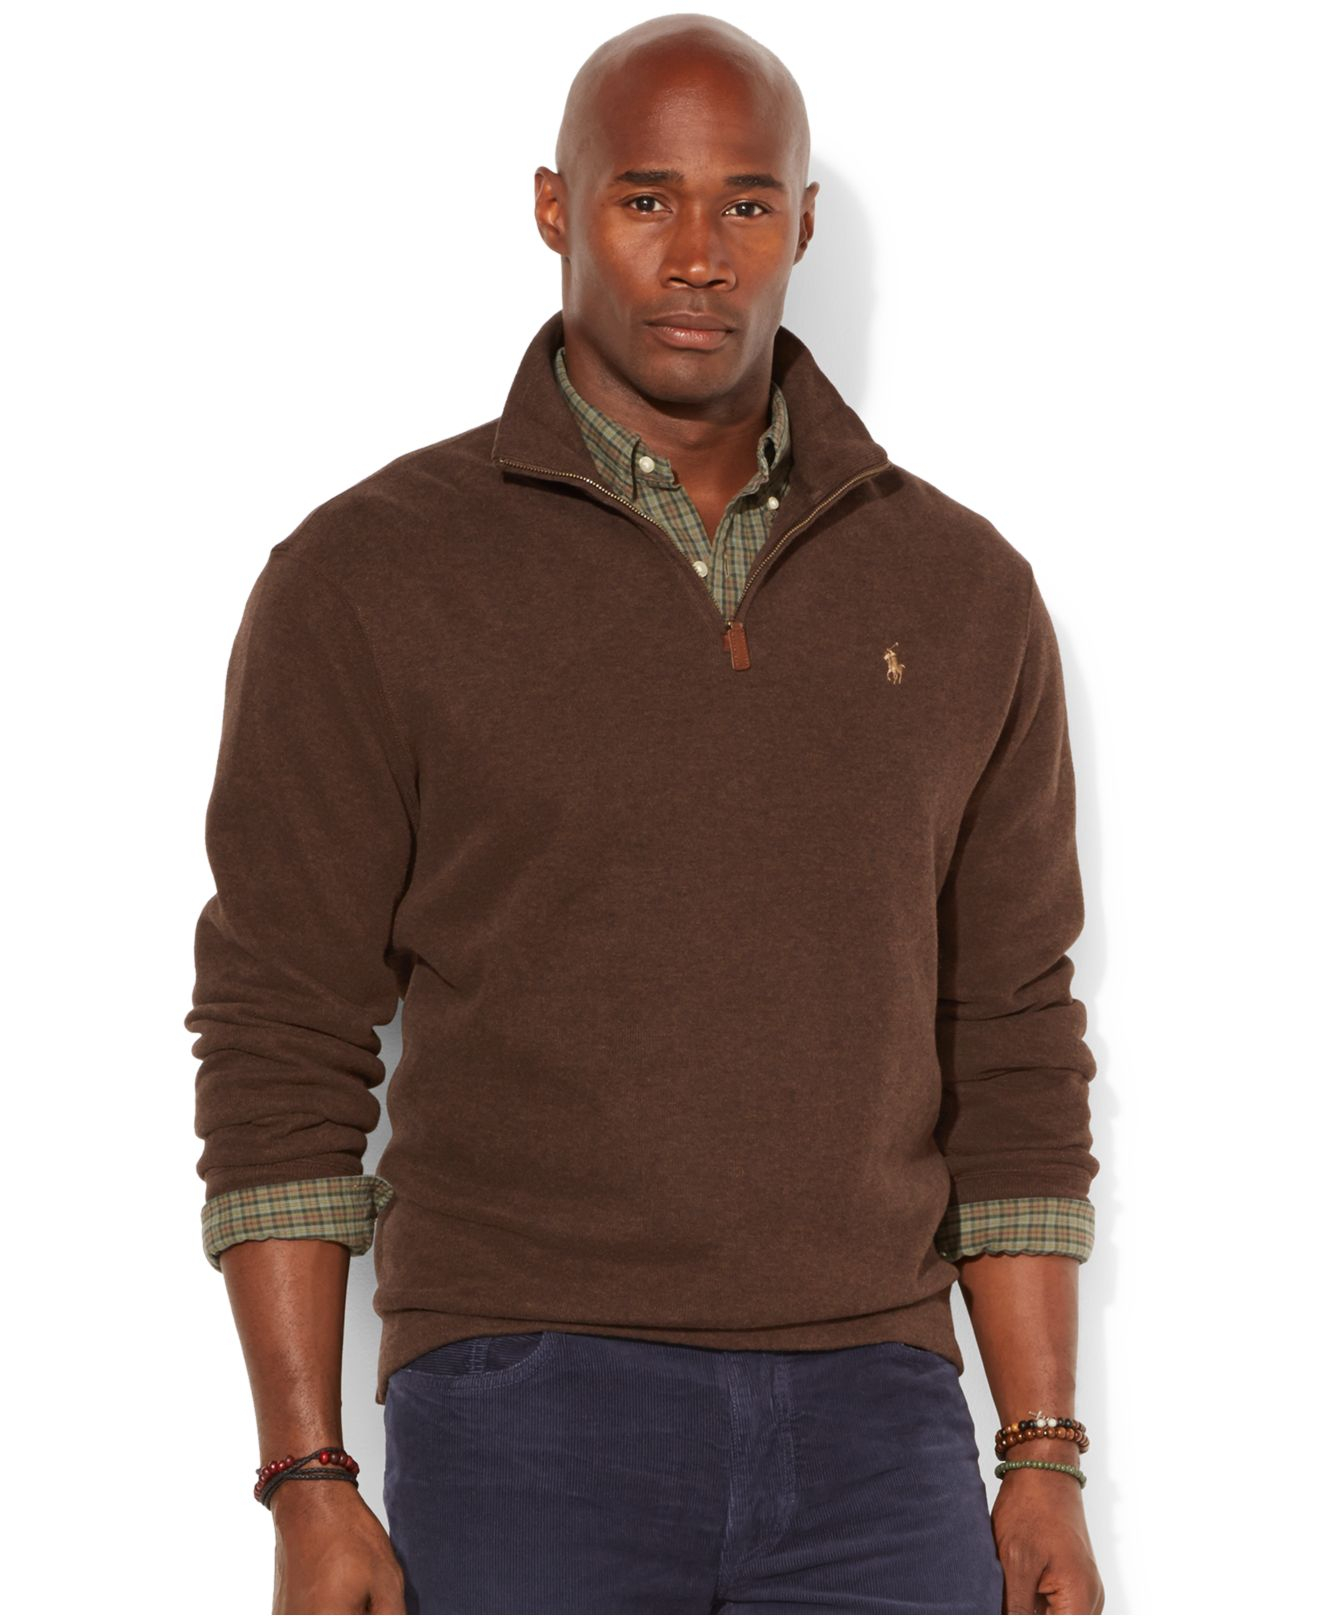 Lyst - Polo ralph lauren Big And Tall Half-Zip French-Rib Sweater in ...